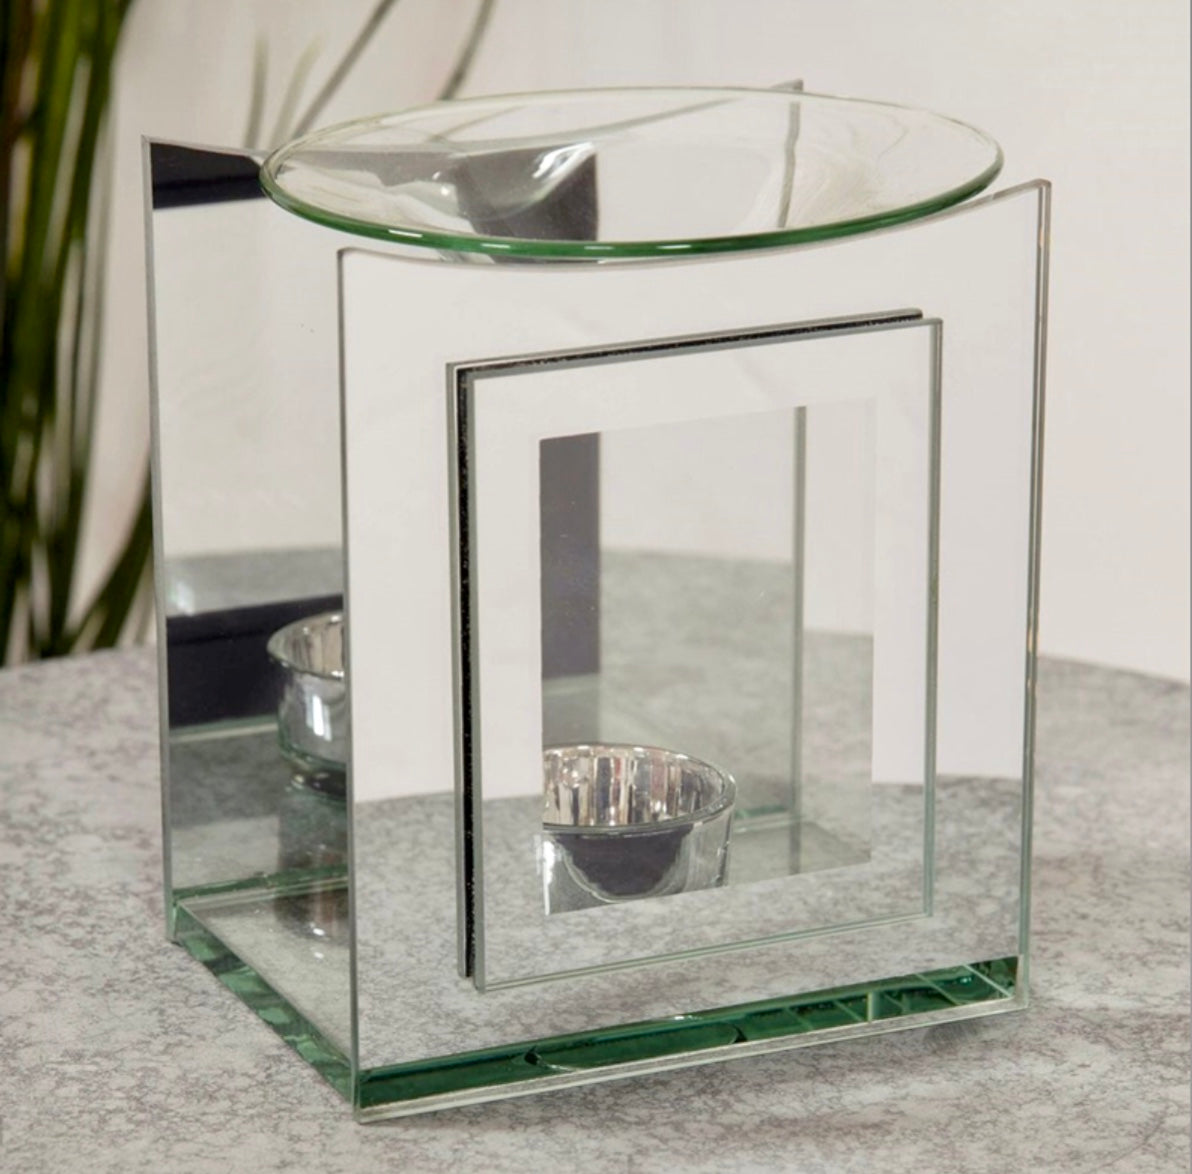 Double Layer Square Mirrored Glass Wax Melt / Oil Burner